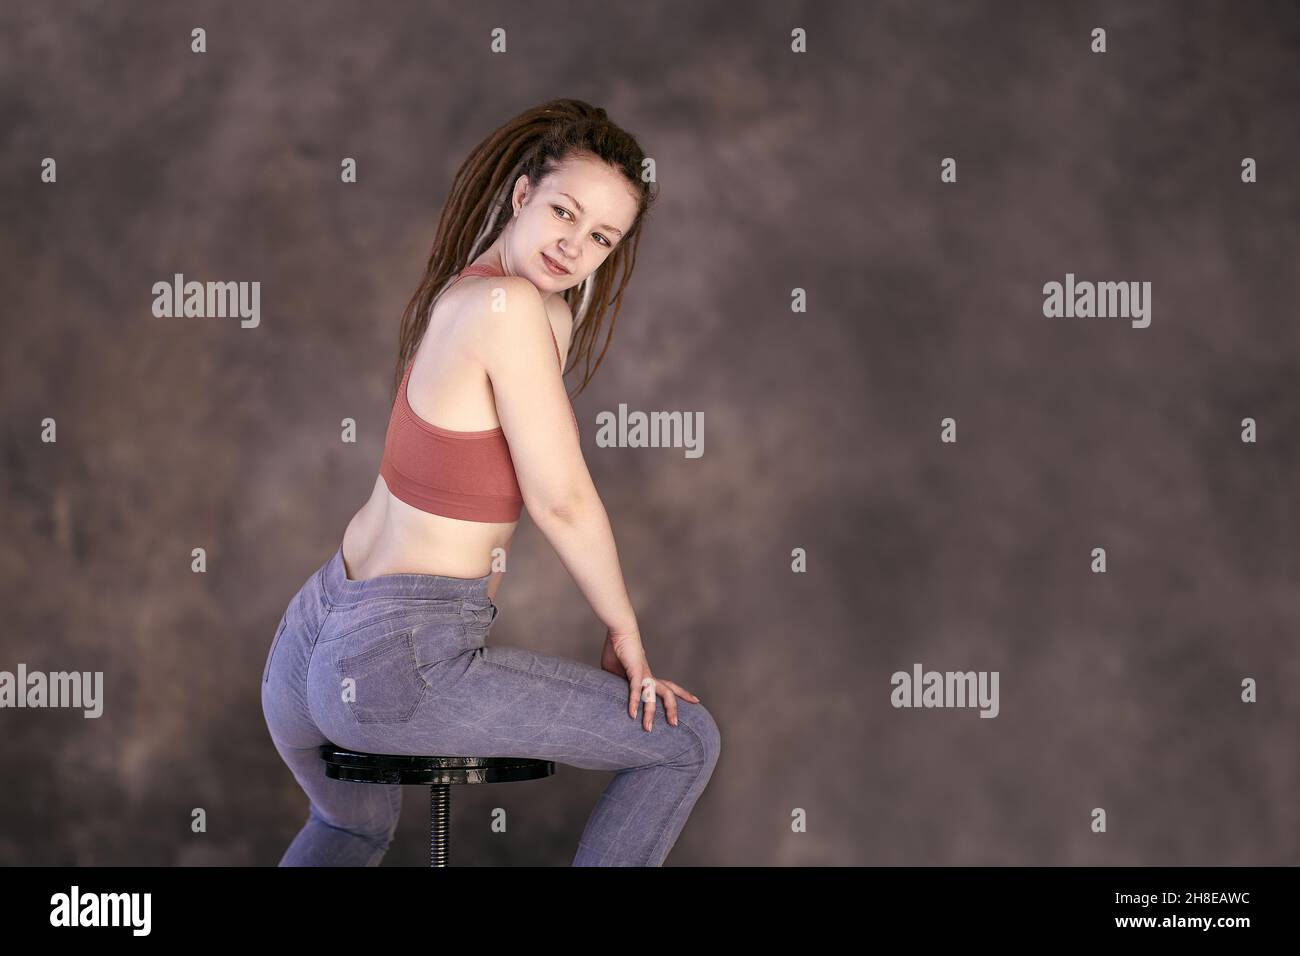 Spiral bar stool on which young white woman sits in tank top and jeans with her back half turned. Stock Photo